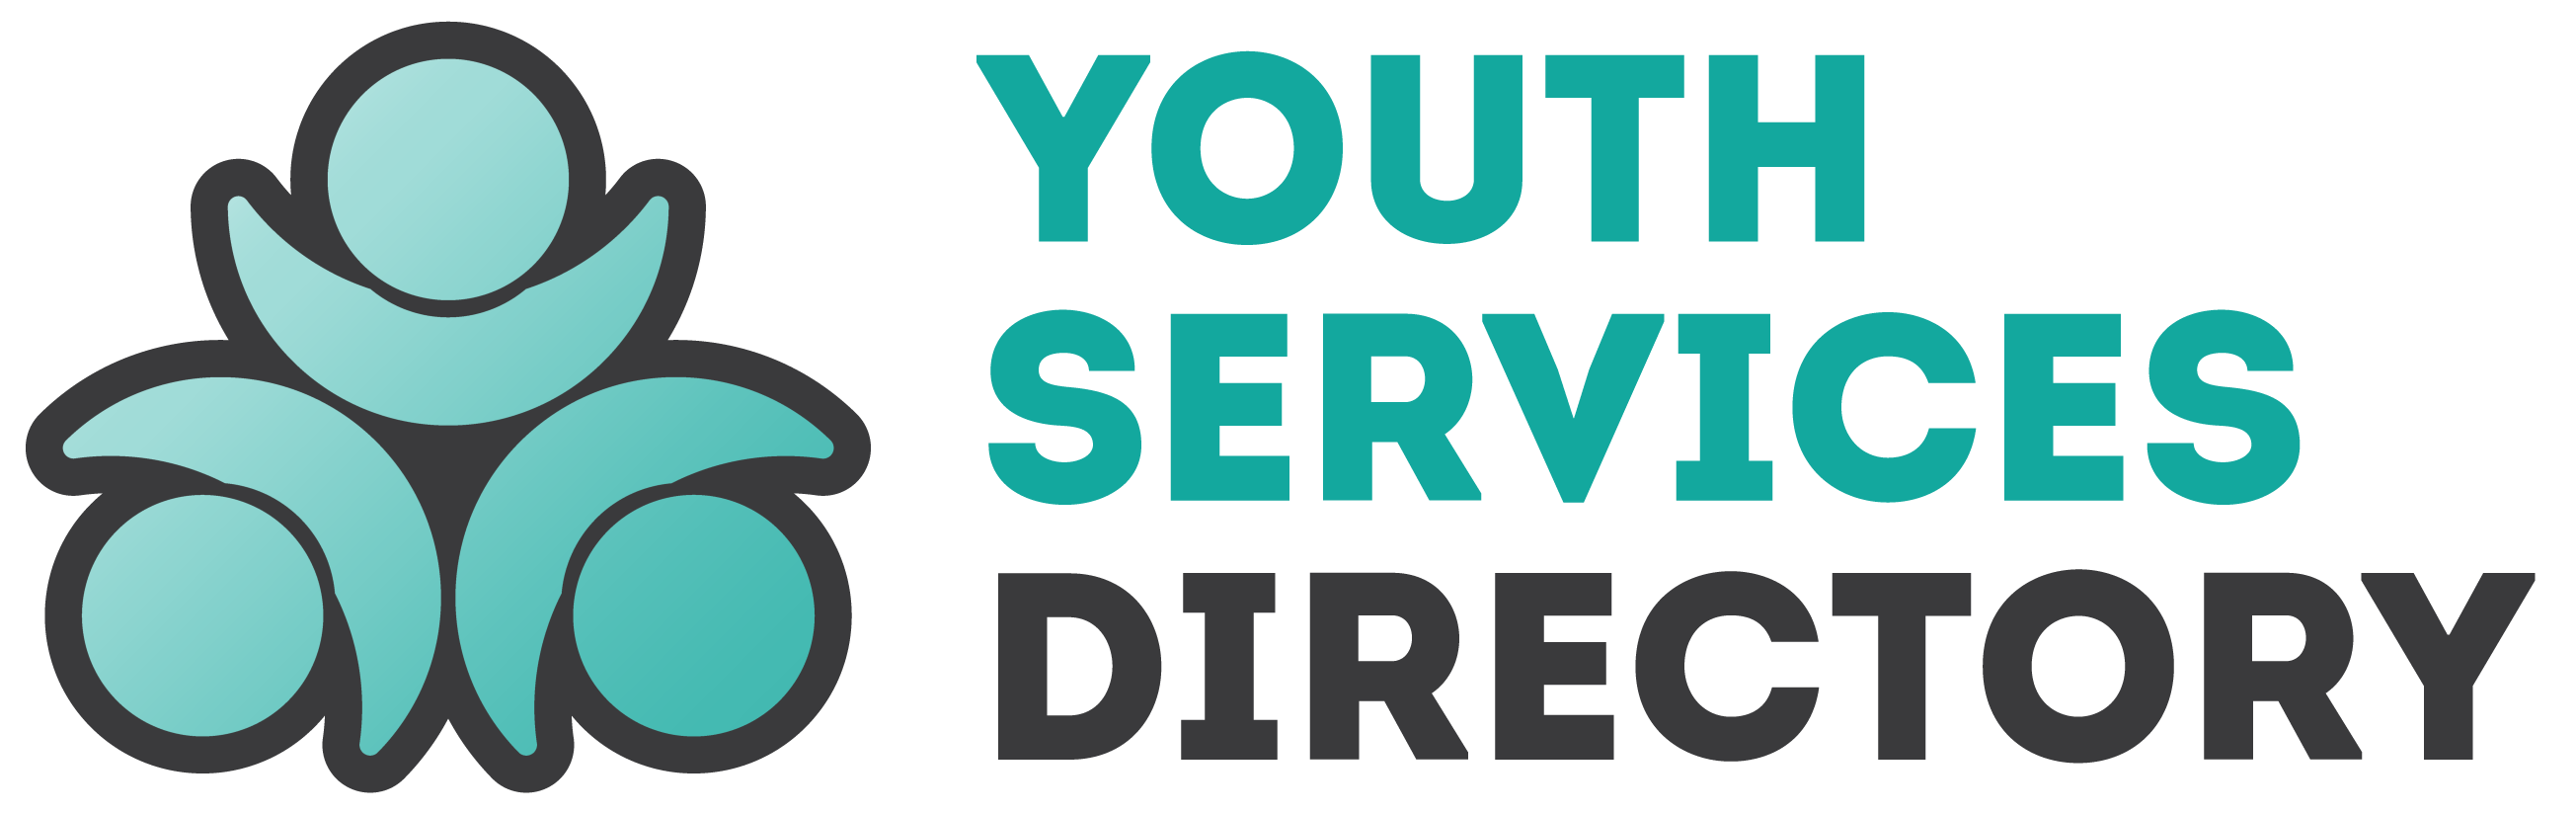 Youth Services Directory